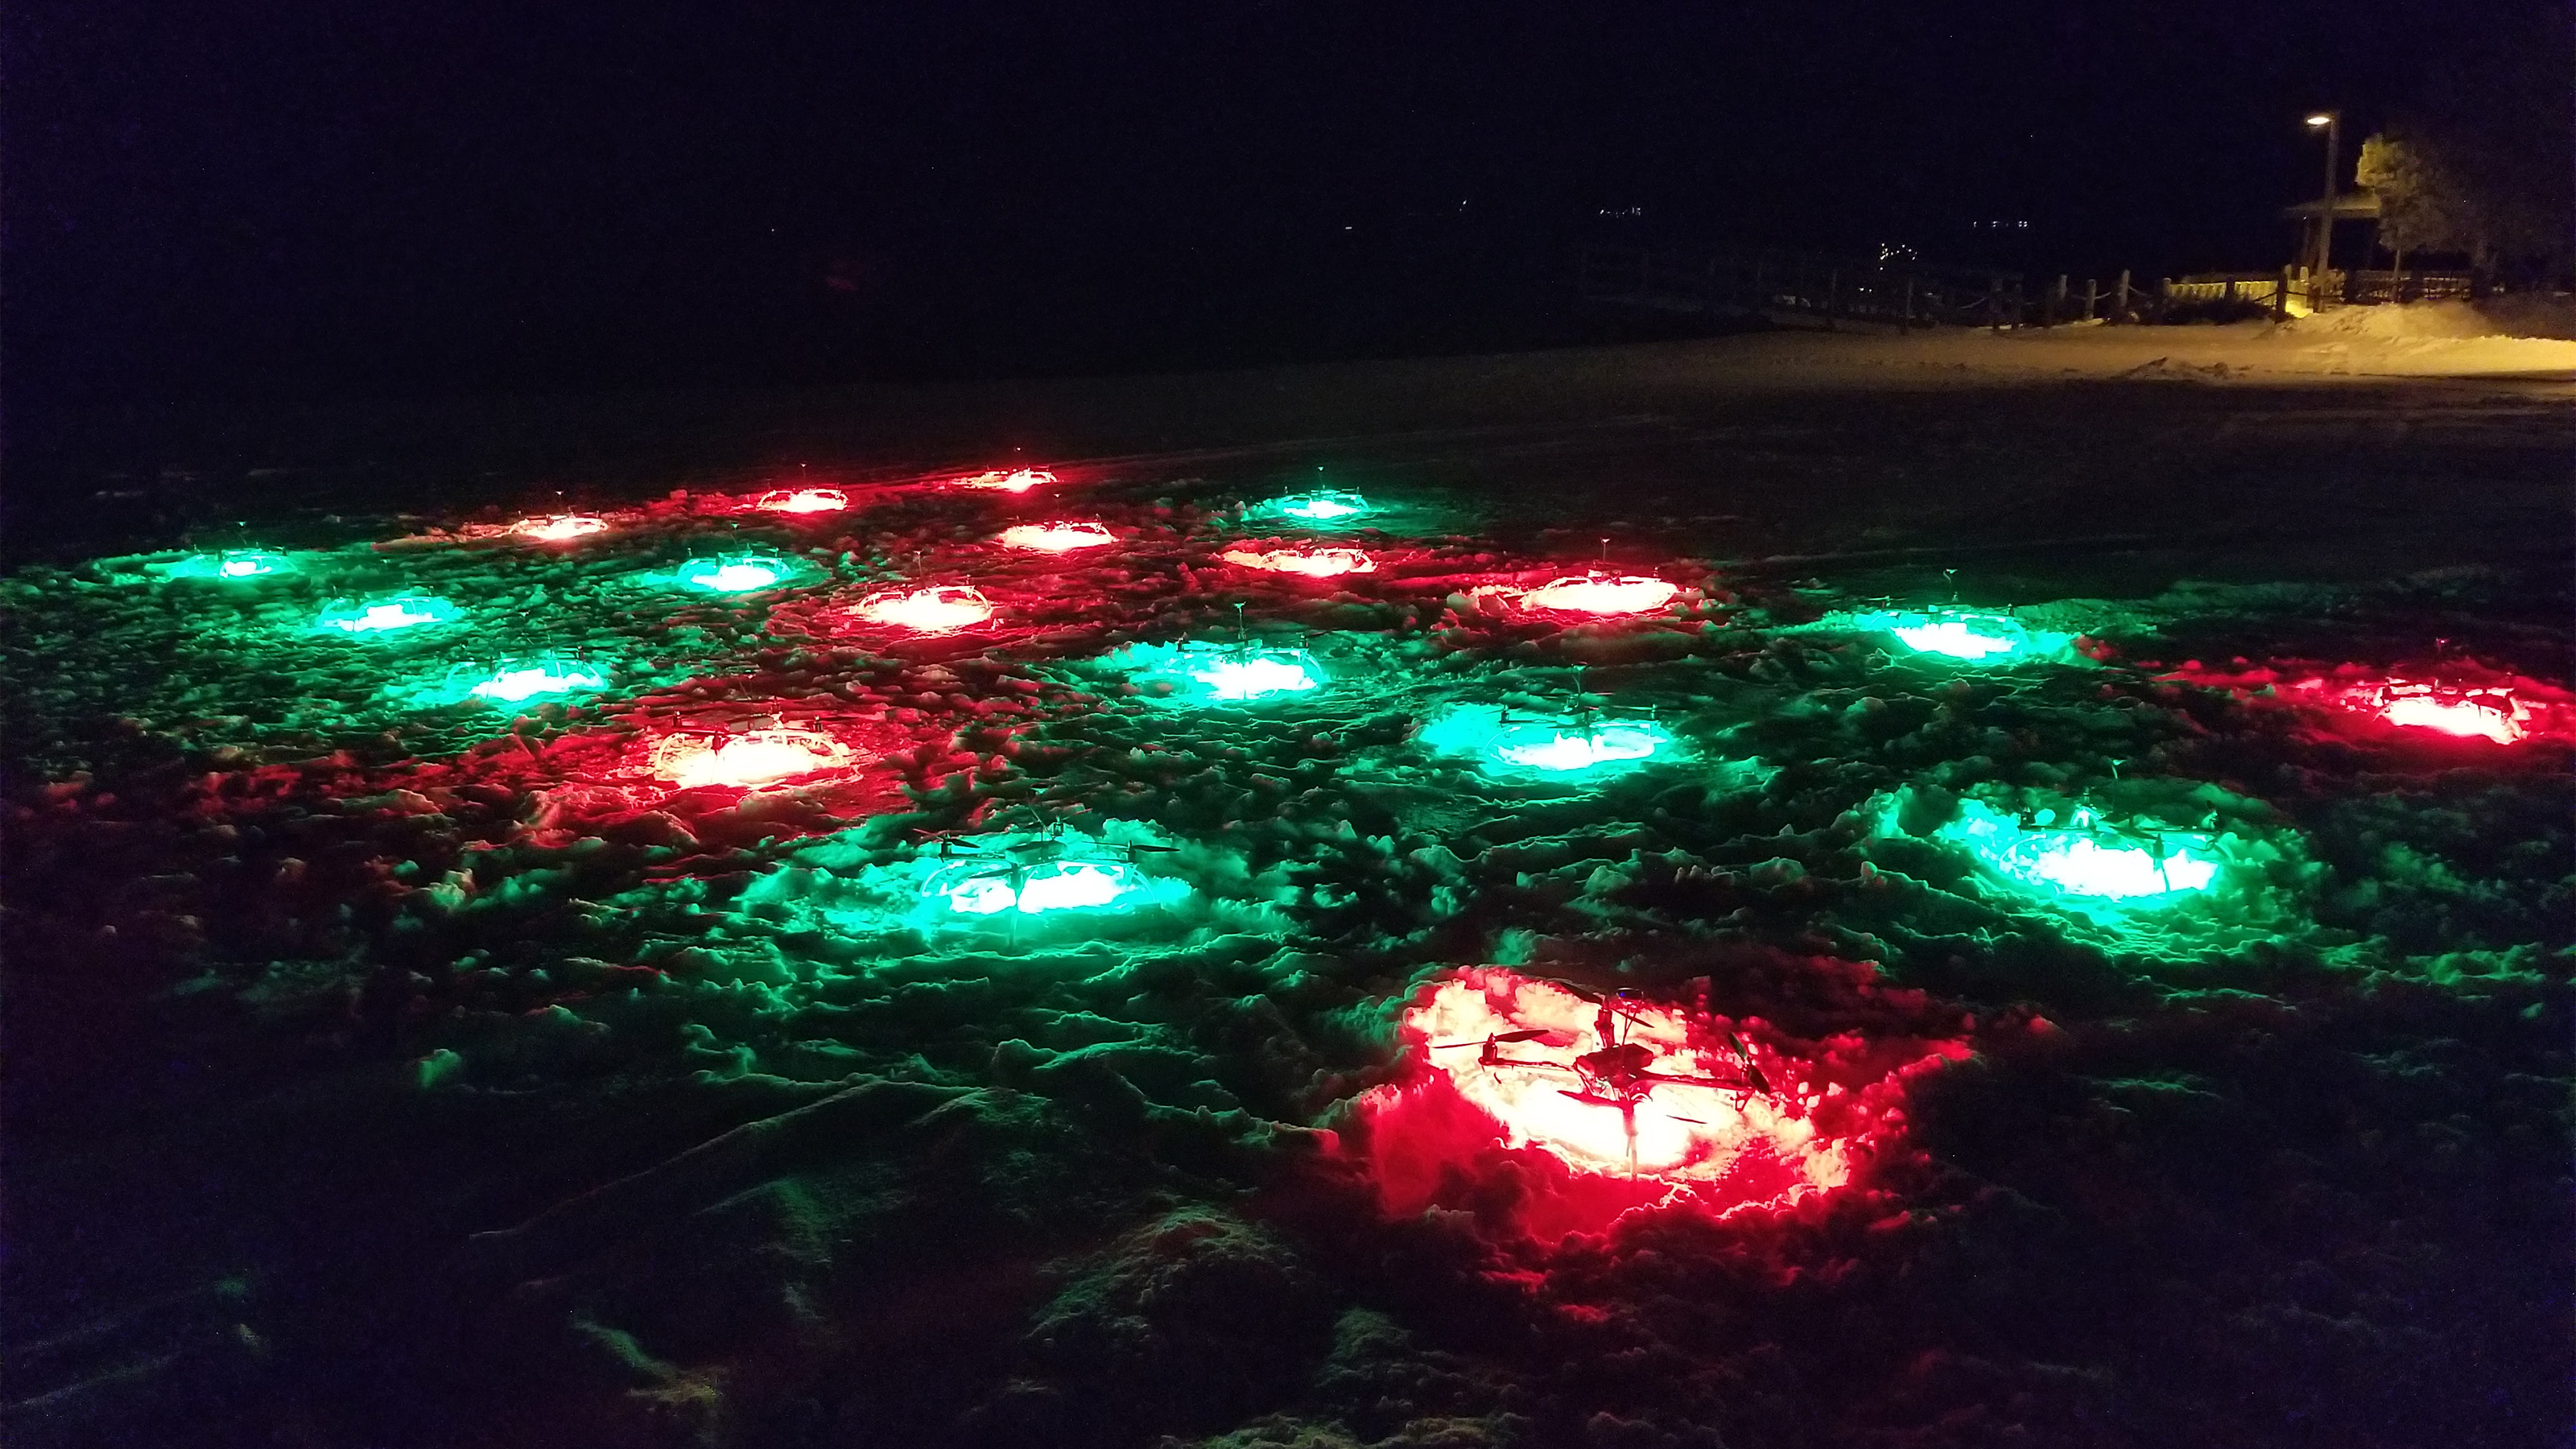 These custom drones have bright LEDs that can create virtually any color in the RGB spectrum. Photo courtesy of the Great Lakes Drone Company.